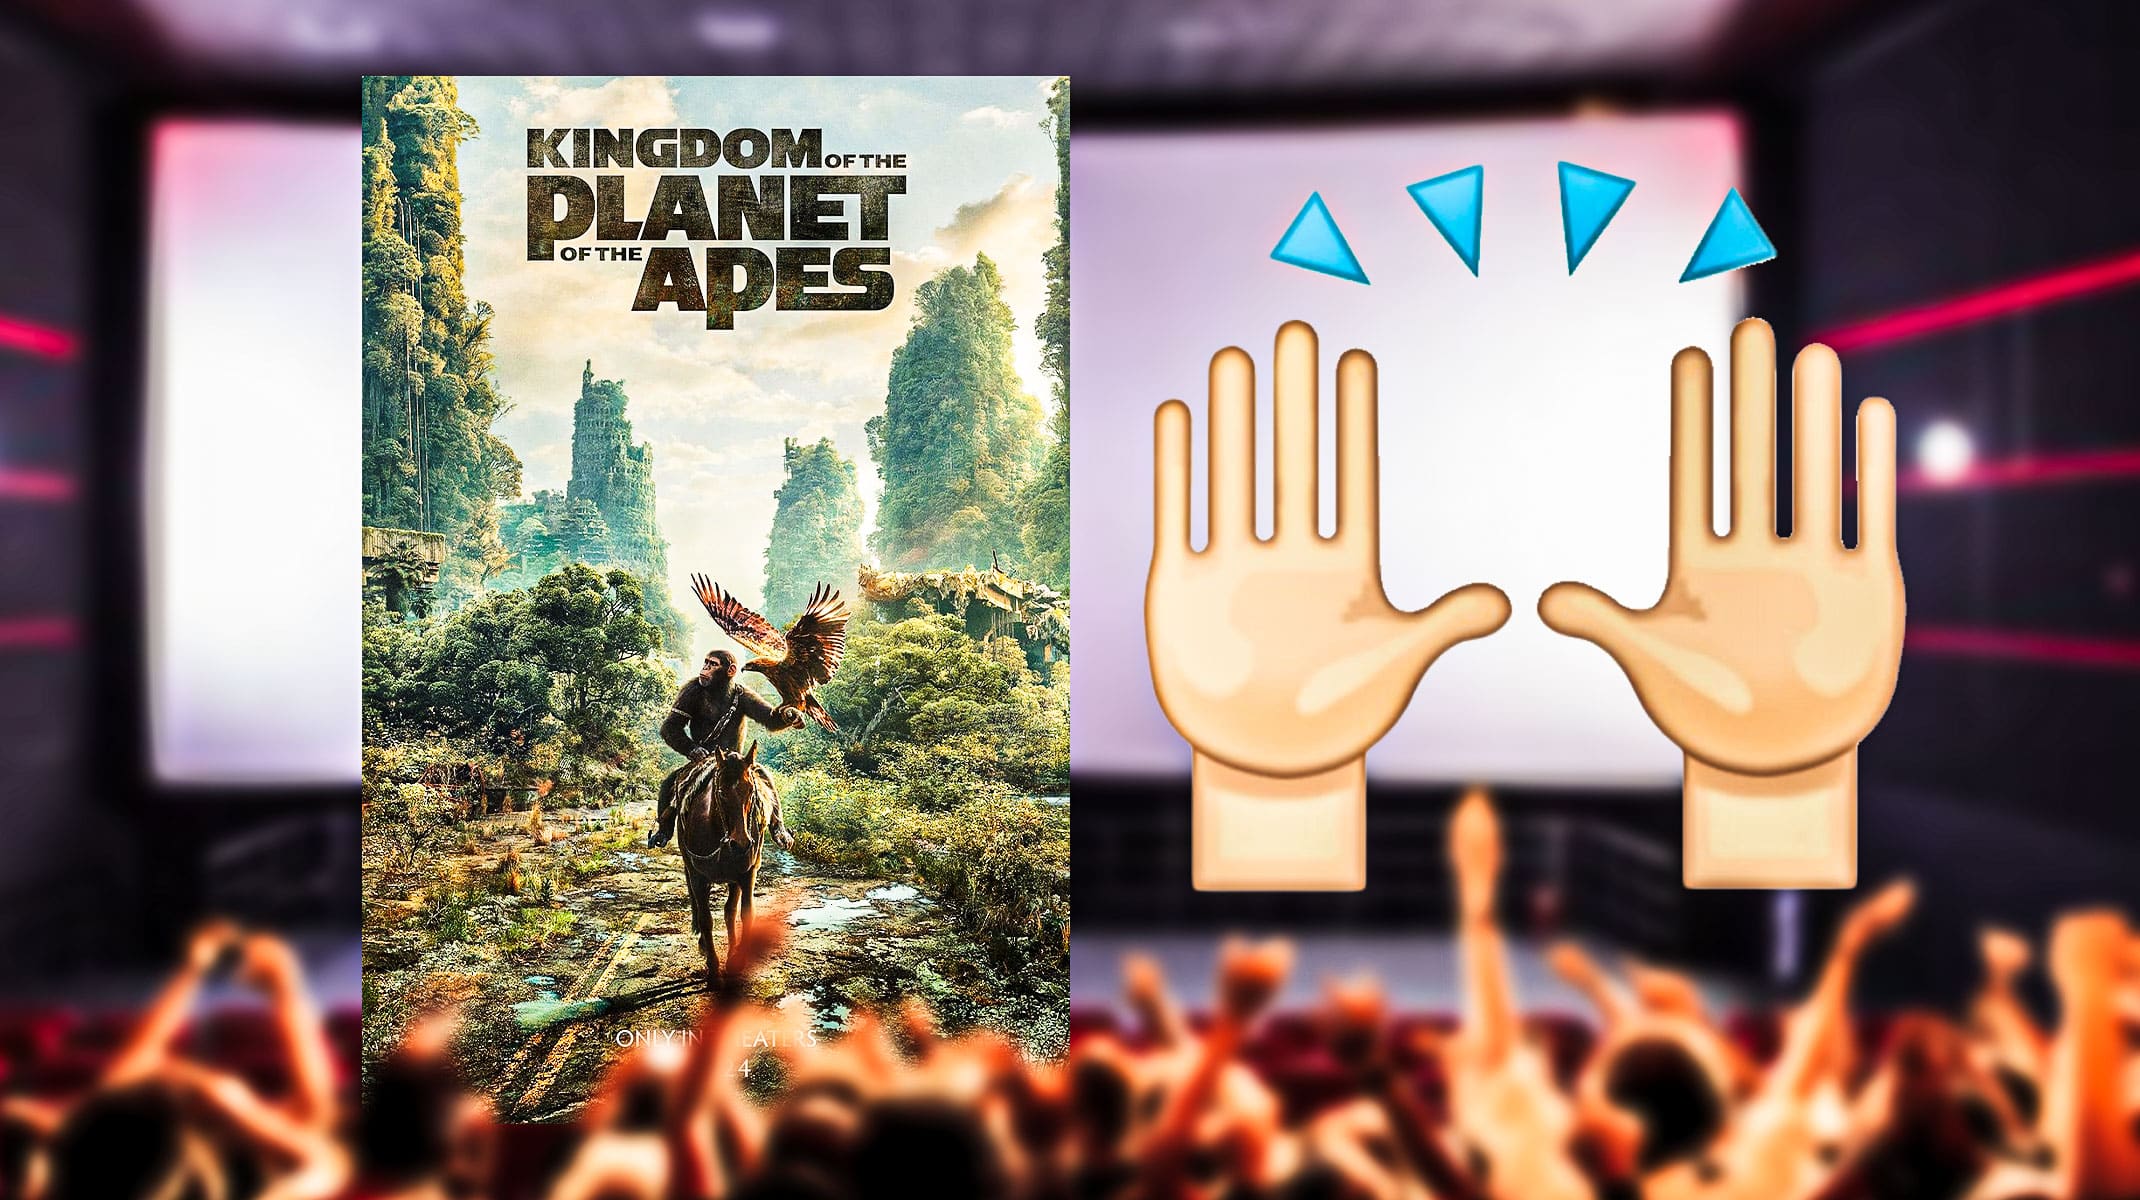 Kingdom of the Planet of the Apes with praise emoji and movie theater background.